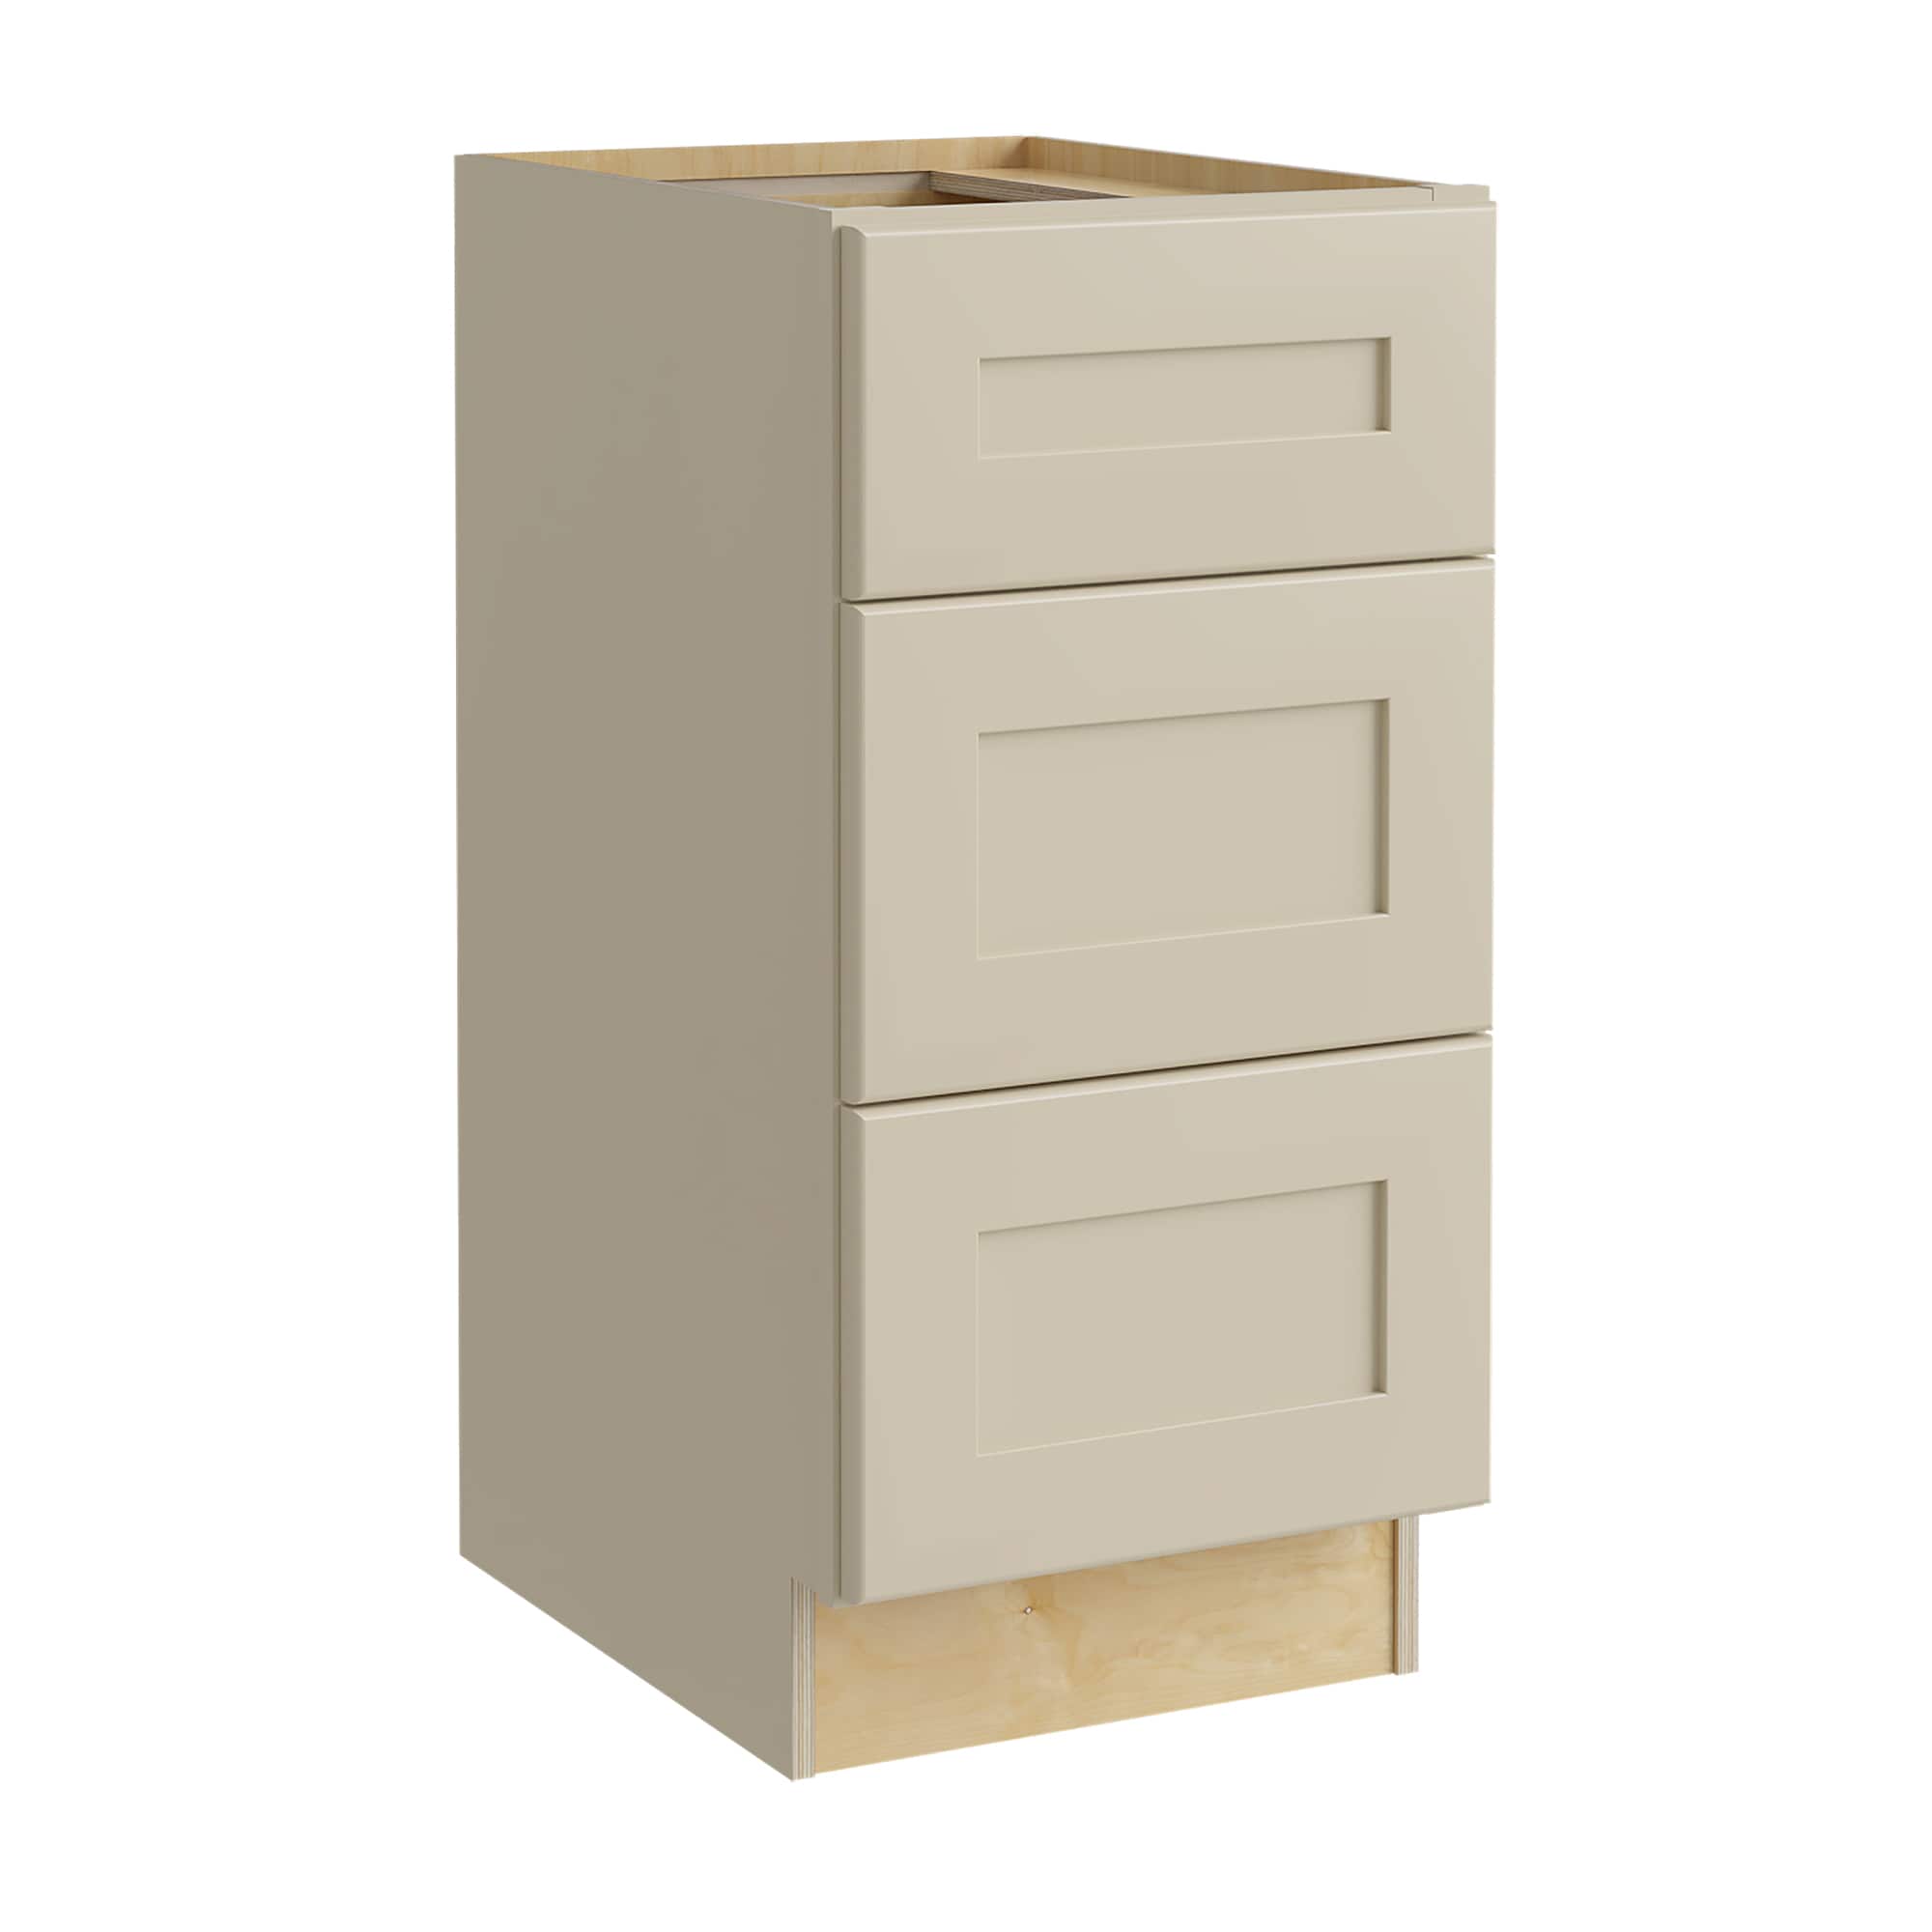 Luxxe Cabinetry 12-in W x 34.5-in H x 24-in D Norfolk Blended Cream Painted Drawer Base Fully Assembled Semi-custom Cabinet in Off-White | BD12-NBC